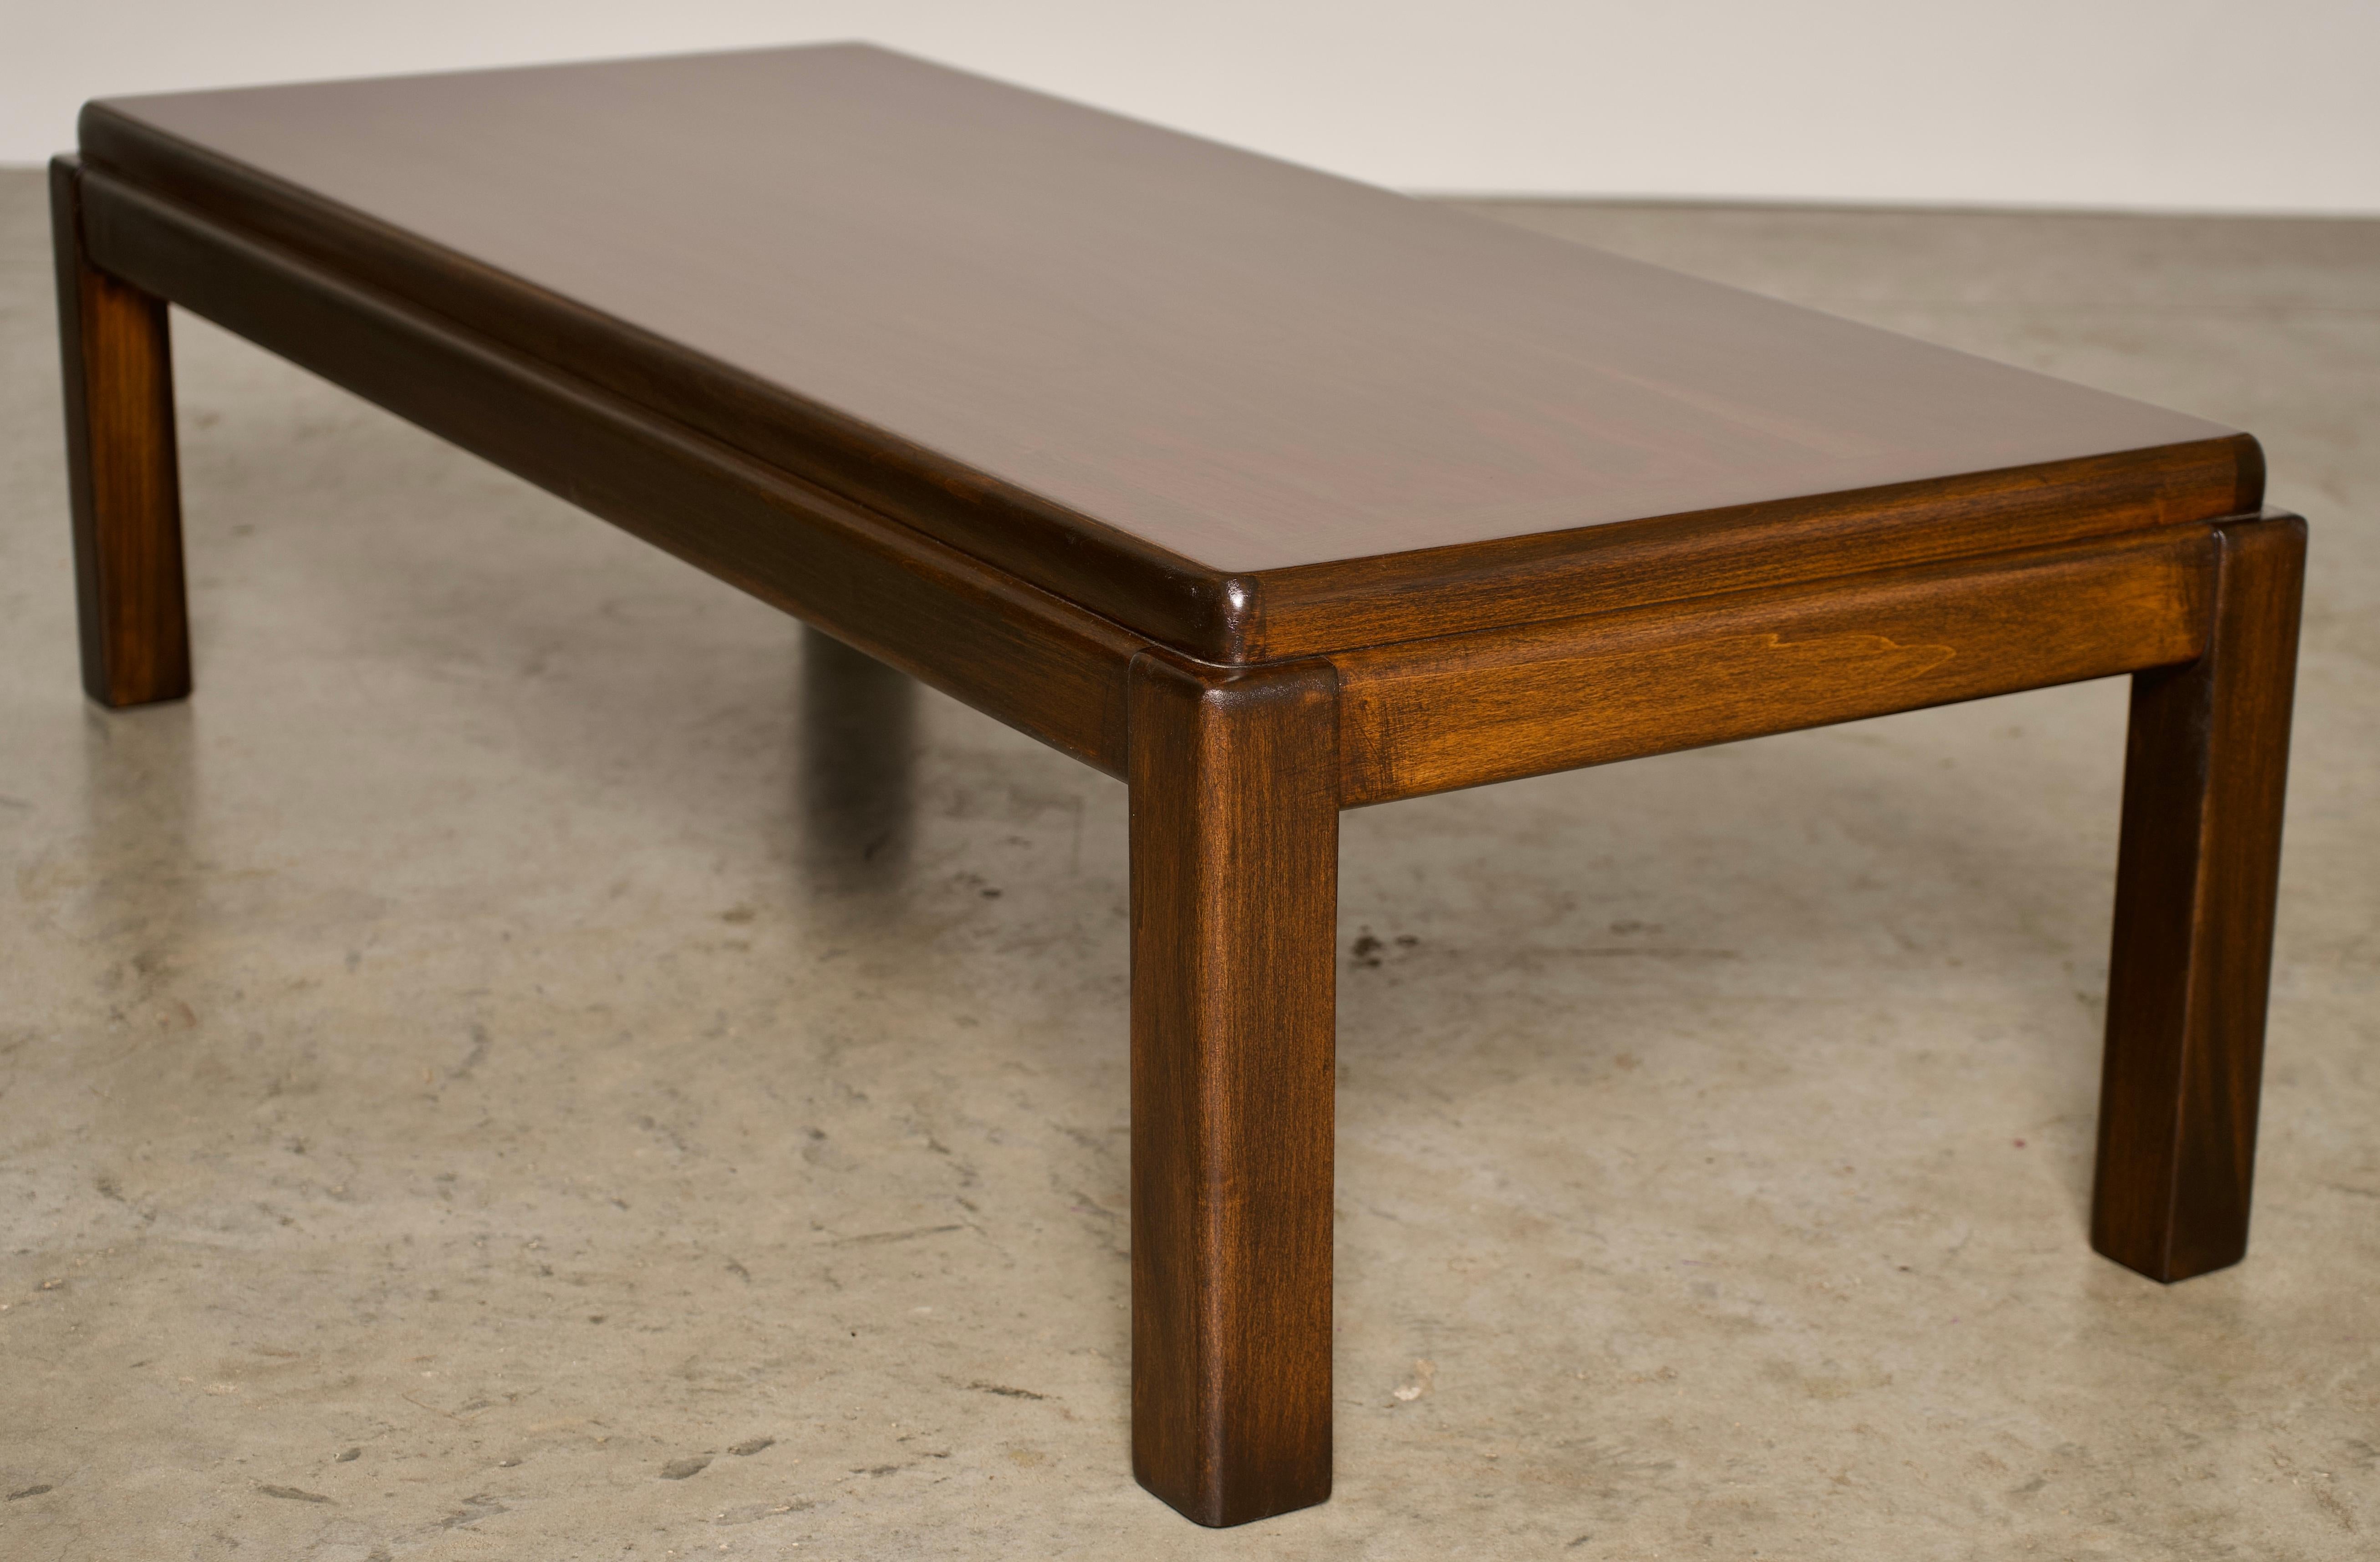 An American walnut rectangular coffee table made by Lane. This Mid-Century Modern coffee table in walnut was made in Altavista, VA by Lane Furniture, manufacturer from the early 1960s. It features simple, geometric lines and a sleek low profile. The